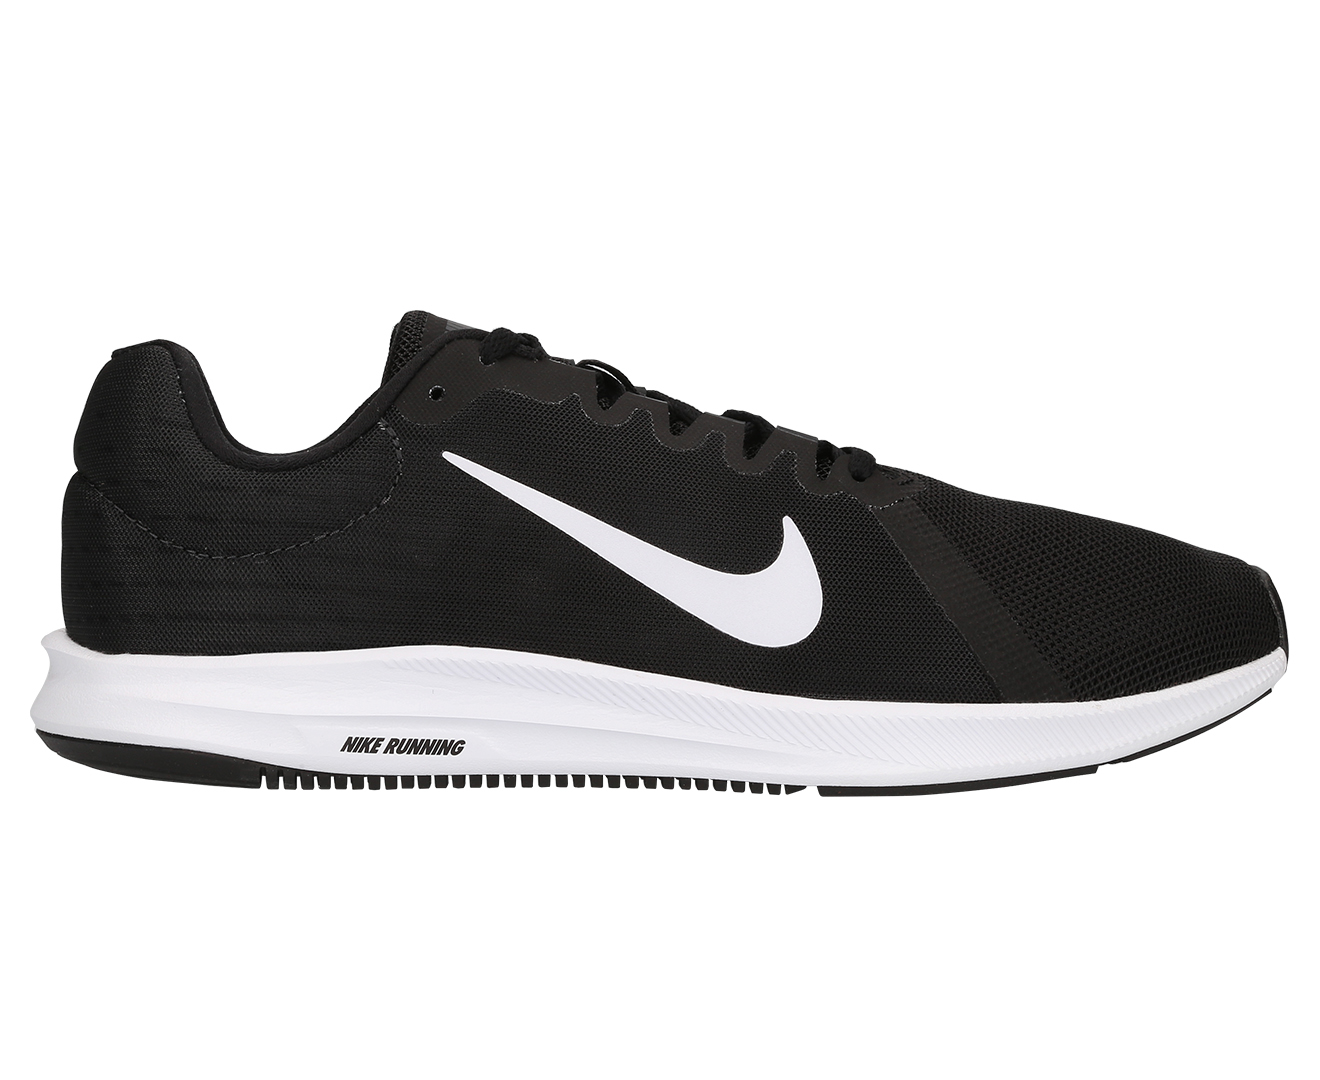 Nike Men's Downshifter 8 Running Sports Shoes - Black/White-Anthracite ...